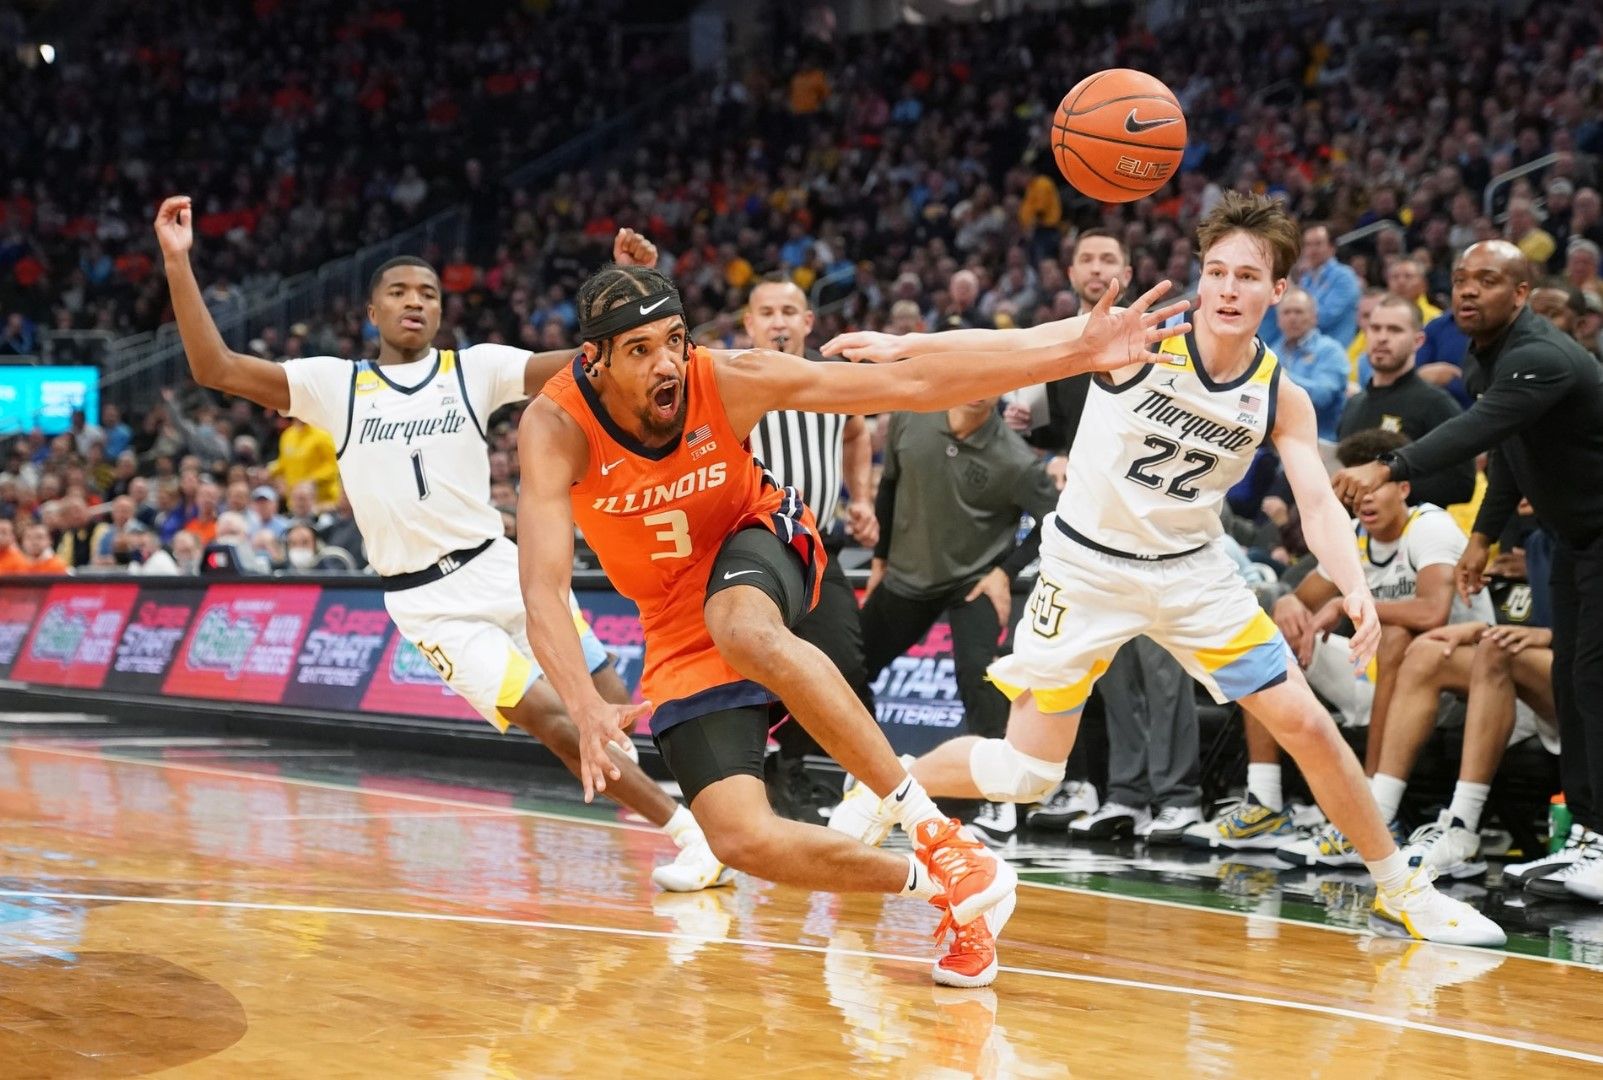 Late steal gives Marquette a 67-66 win over No. 10 Illinois